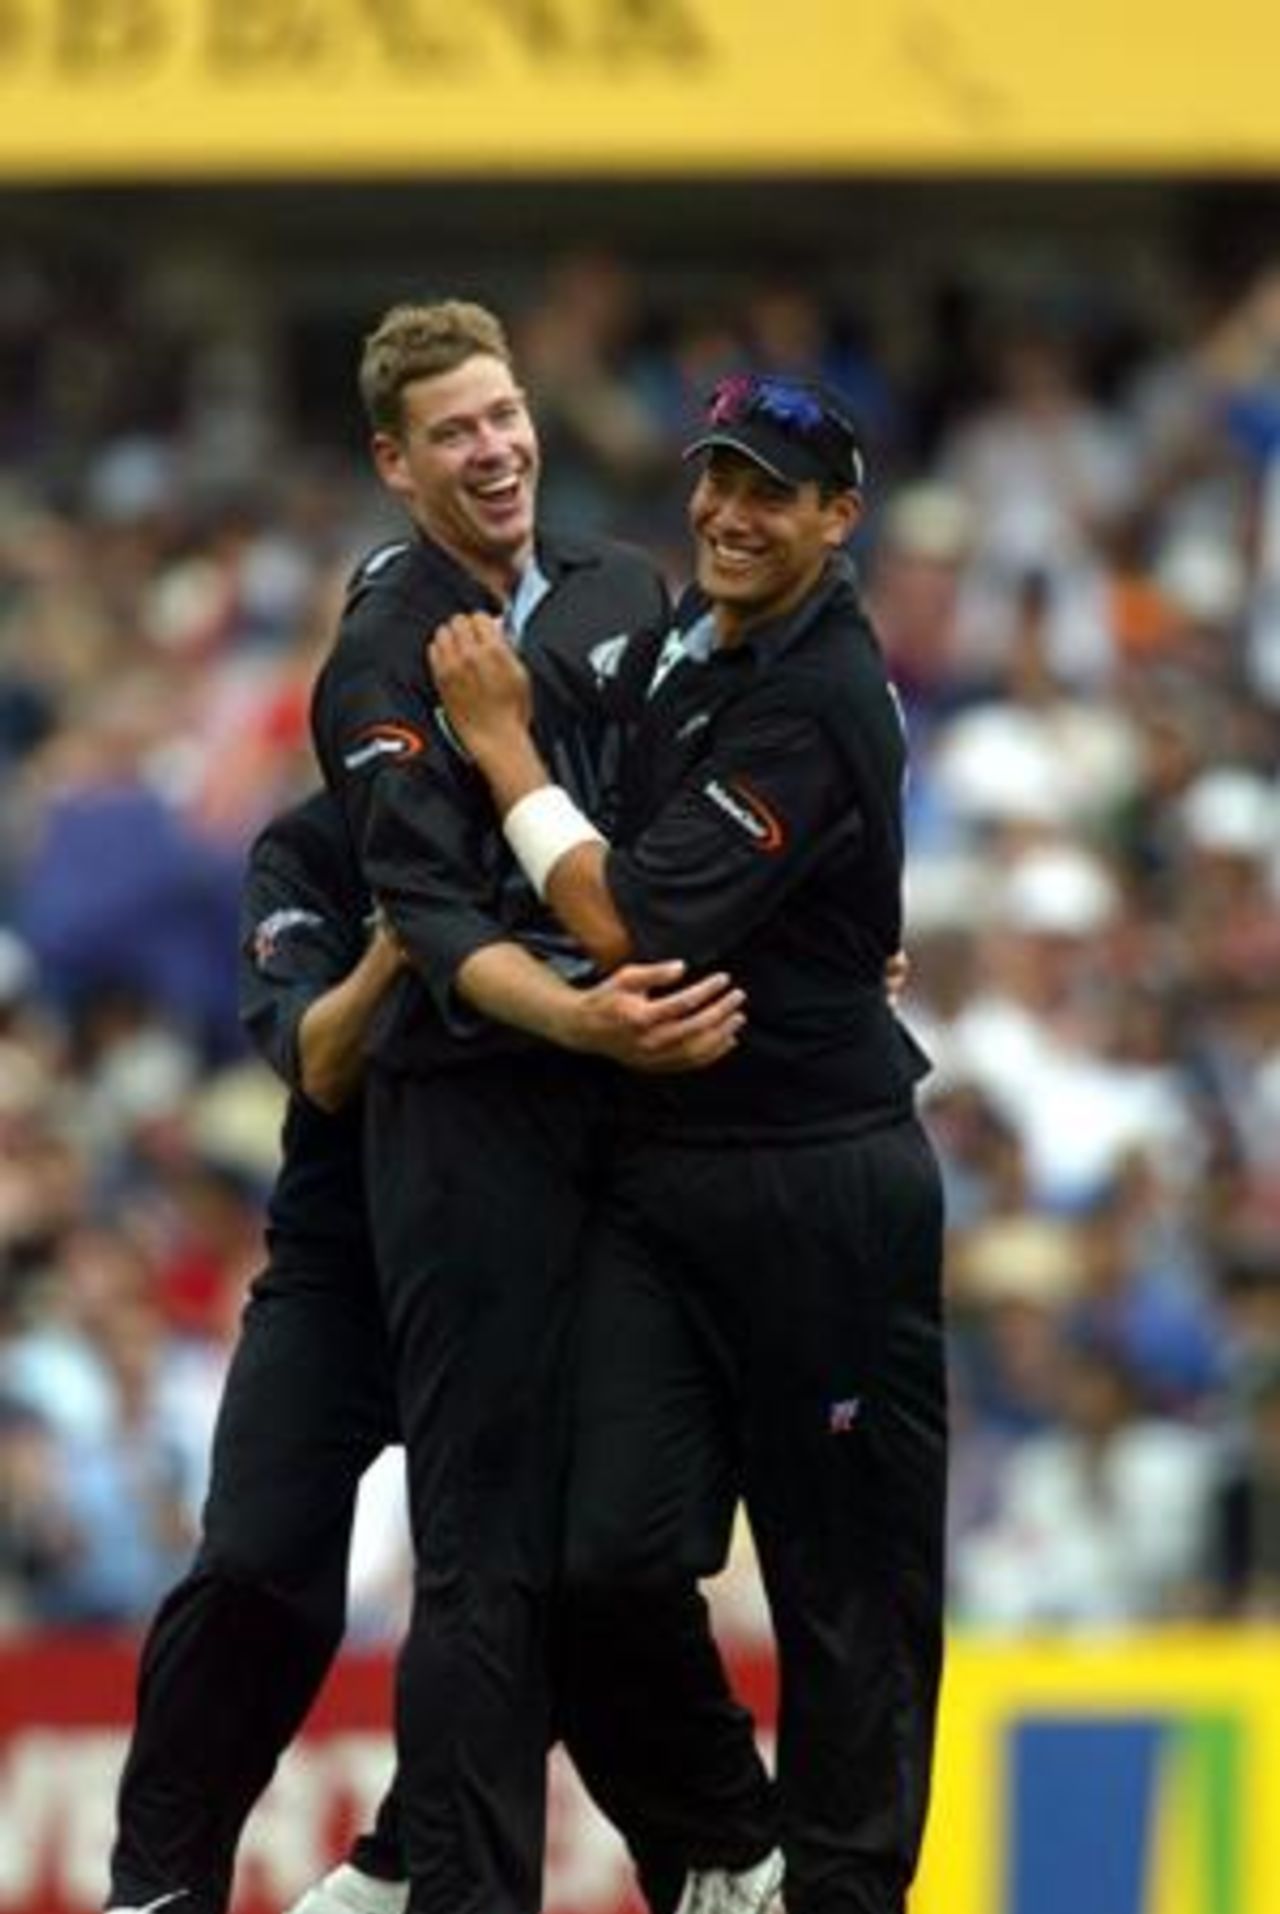 New Zealand bowler Jacob Oram (left) is congratulated by team-mate Daryl Tuffey after dismissing Indian batsman Yuvraj Singh, caught by Nathan Astle at second slip for two. 1st ODI: New Zealand v India at Eden Park, Auckland, 26 December 2002.